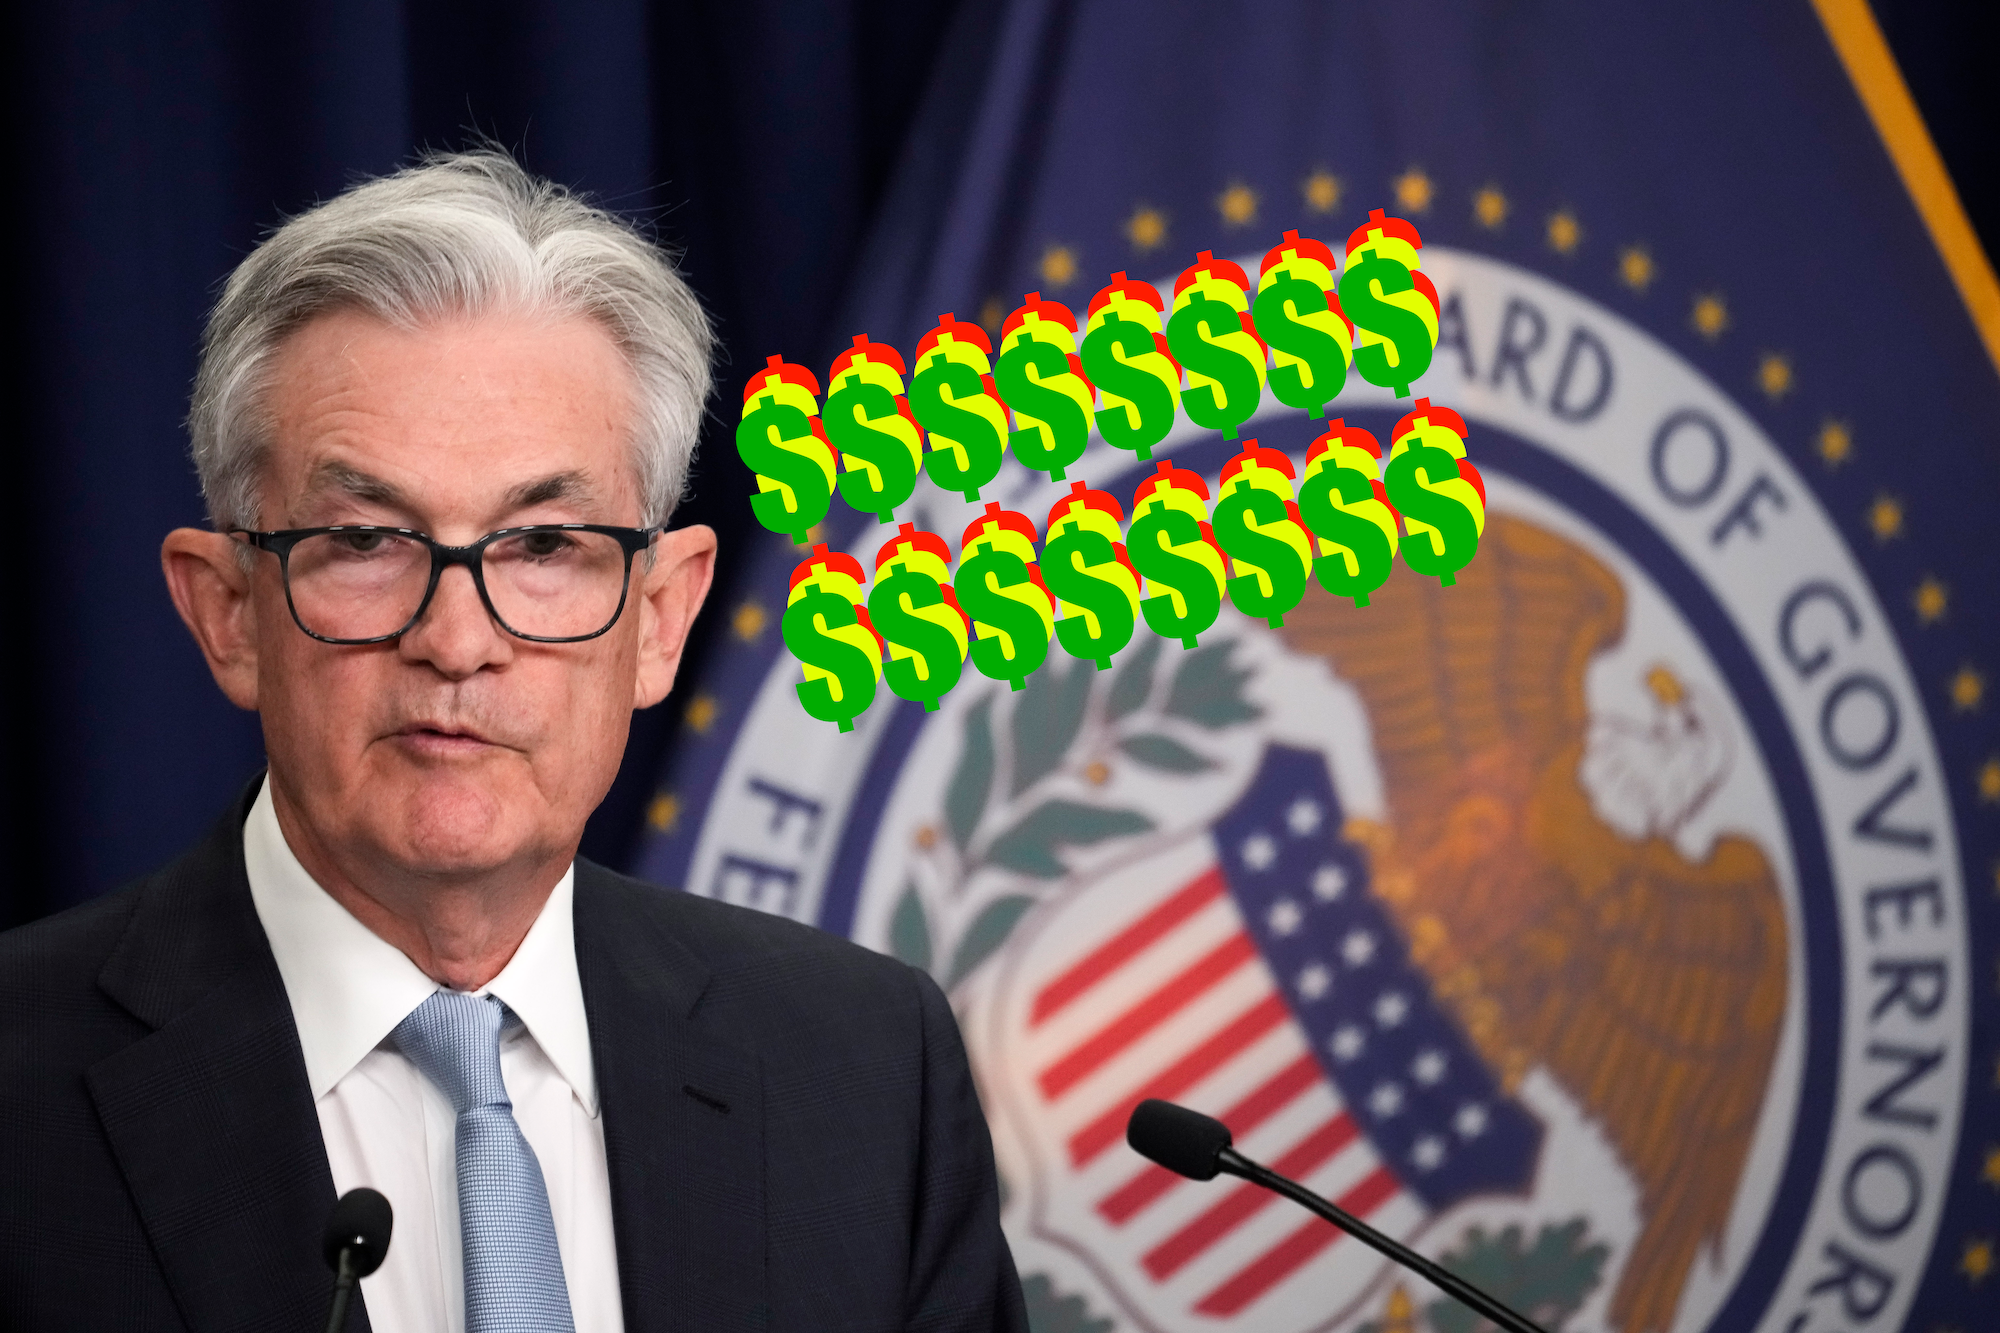 OK, WTF Is Going on With Inflation, Interest Rates, the Fed, Jerome Powell, Gas Prices, the Economy, Your Job, Rent, Etc.